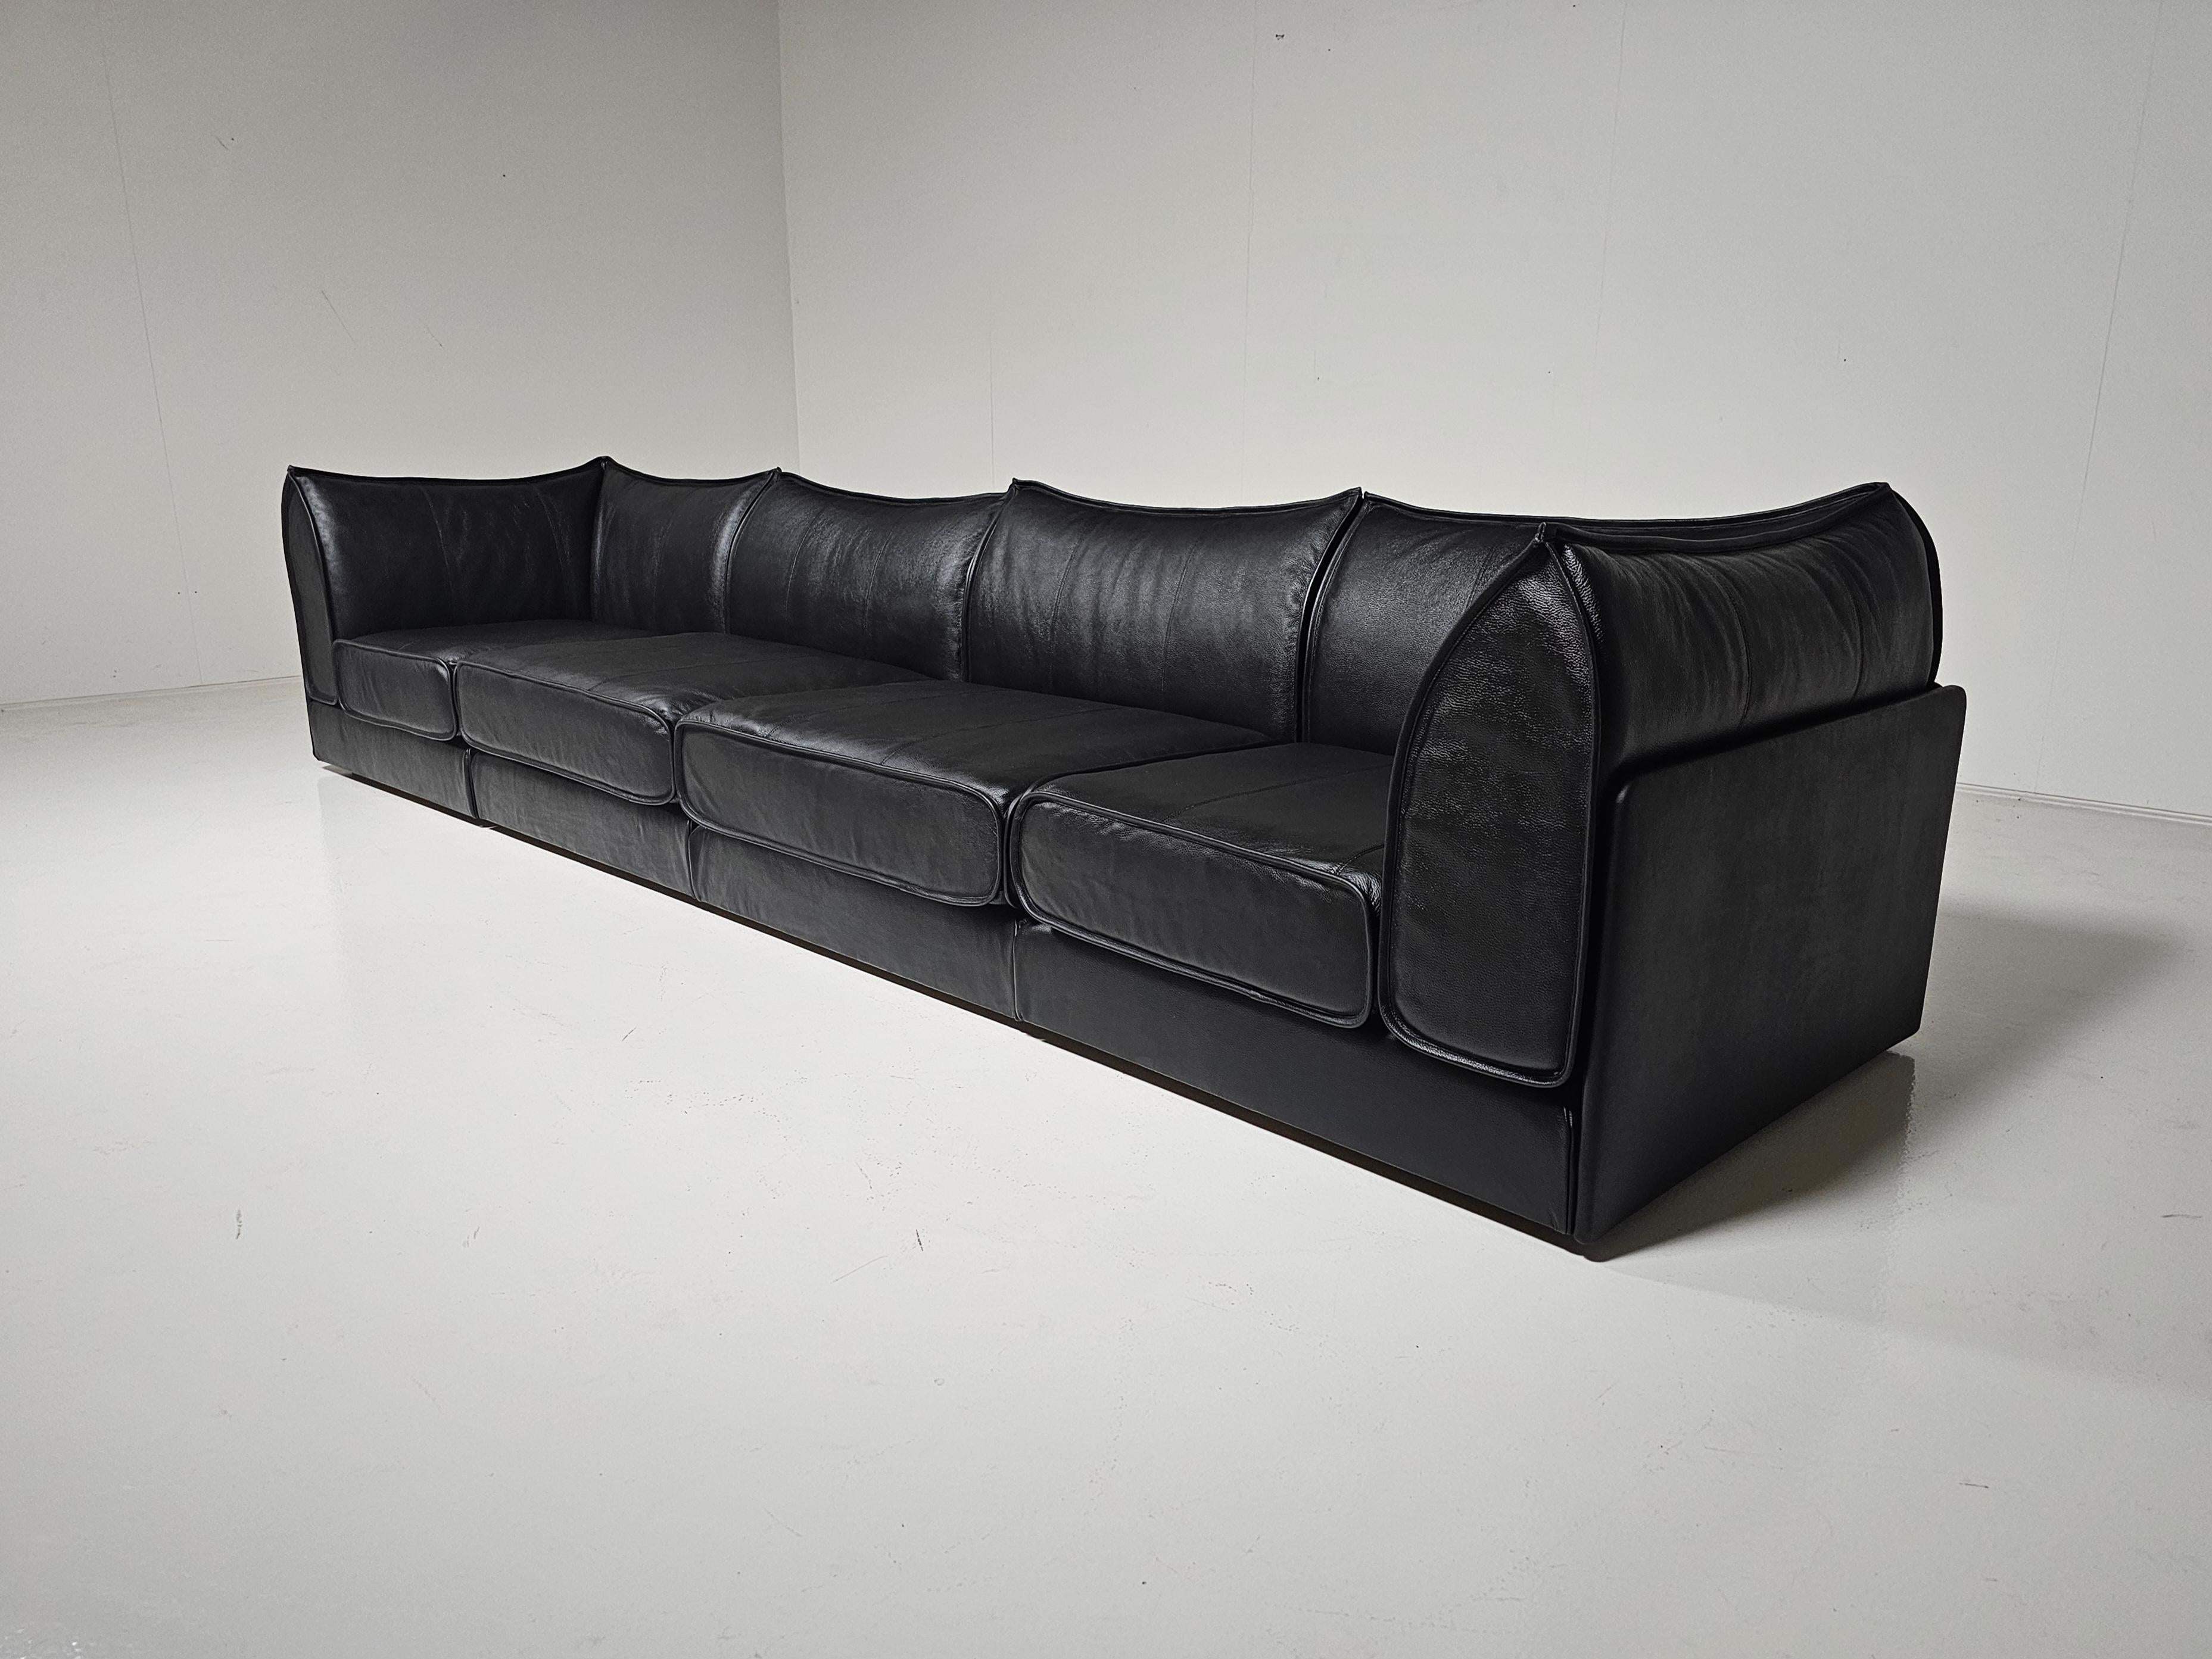 De Sede DS1-19, Pagoda, De Sede Switserland, 1970s

Rare De Sede Pagoda four-seater sofa in newly upholstered black leather. The design is characterized by pointy edges that are noticeable in the shape of the back- and armrest cushions. The design